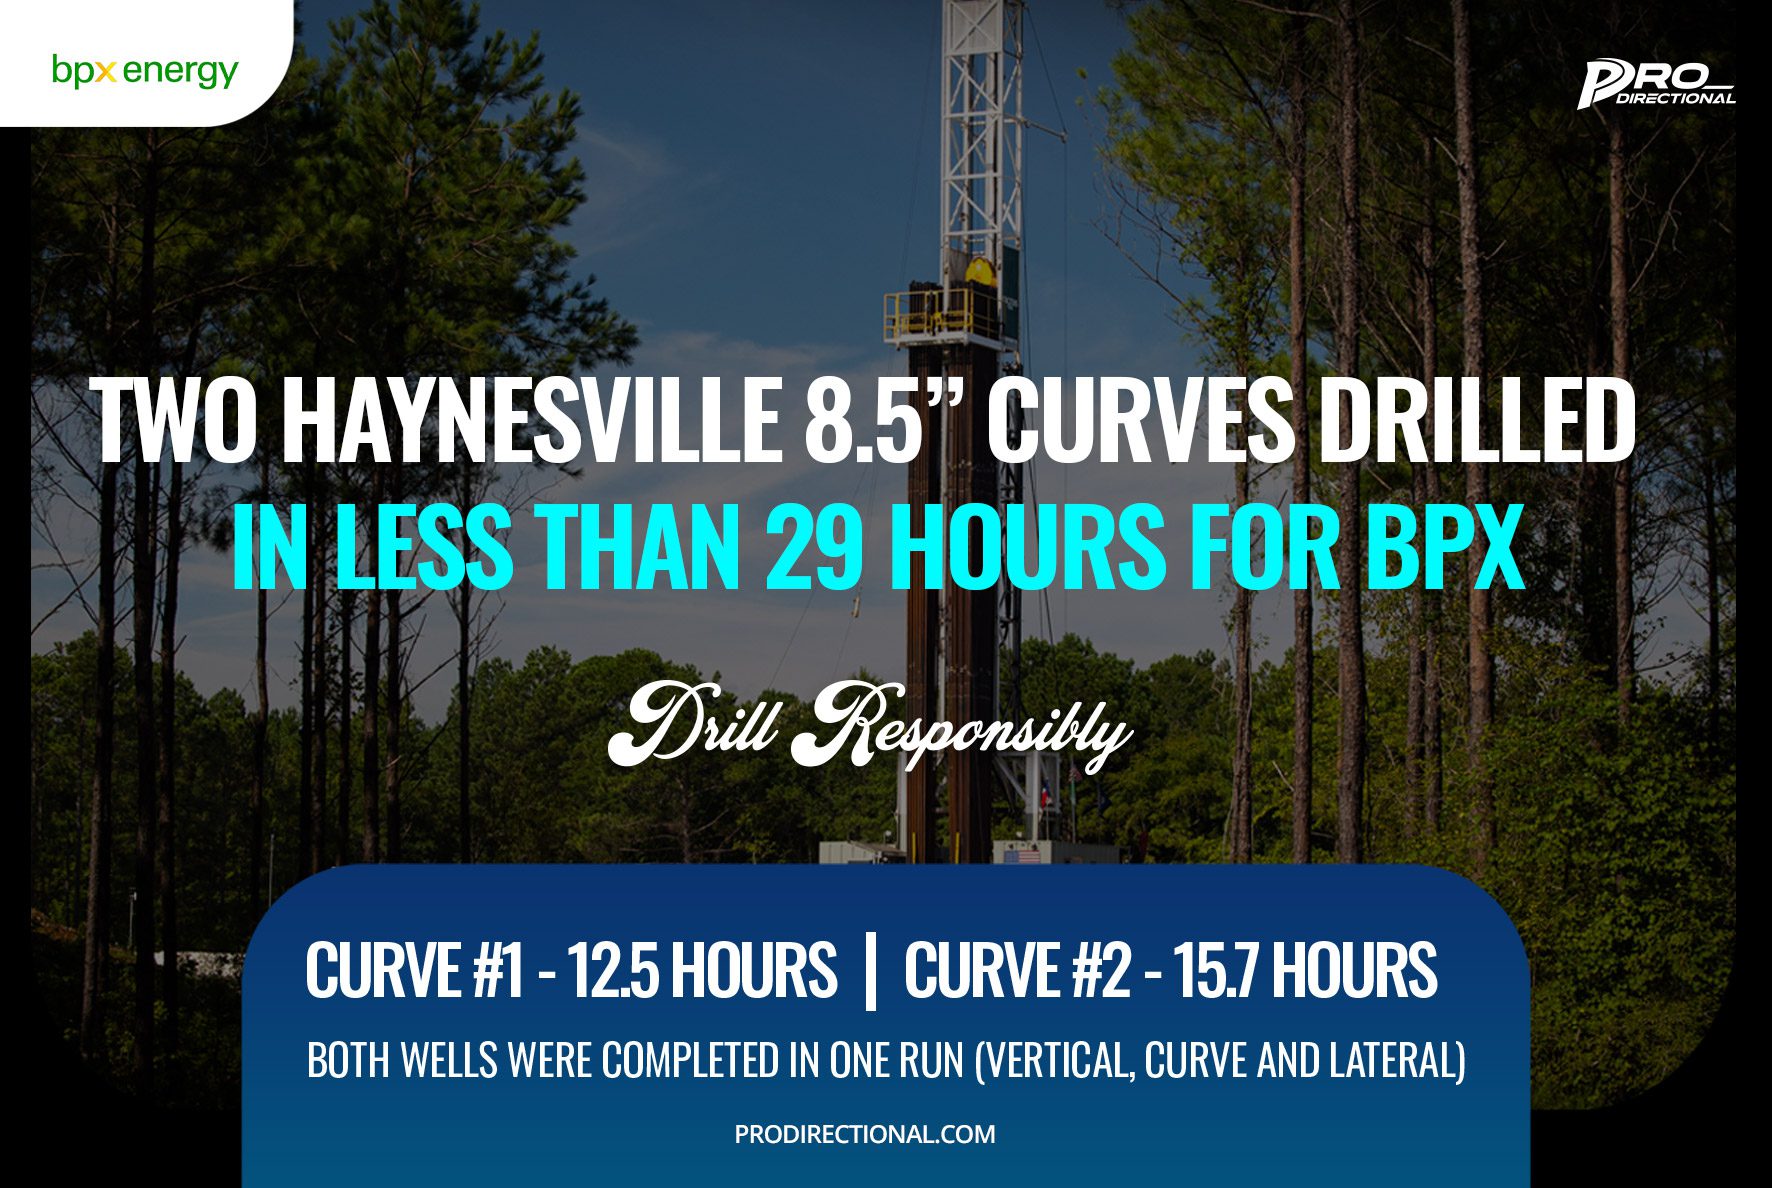 Featured image for “Two Haynesville curves drilled in less than 29 hours for BPX”